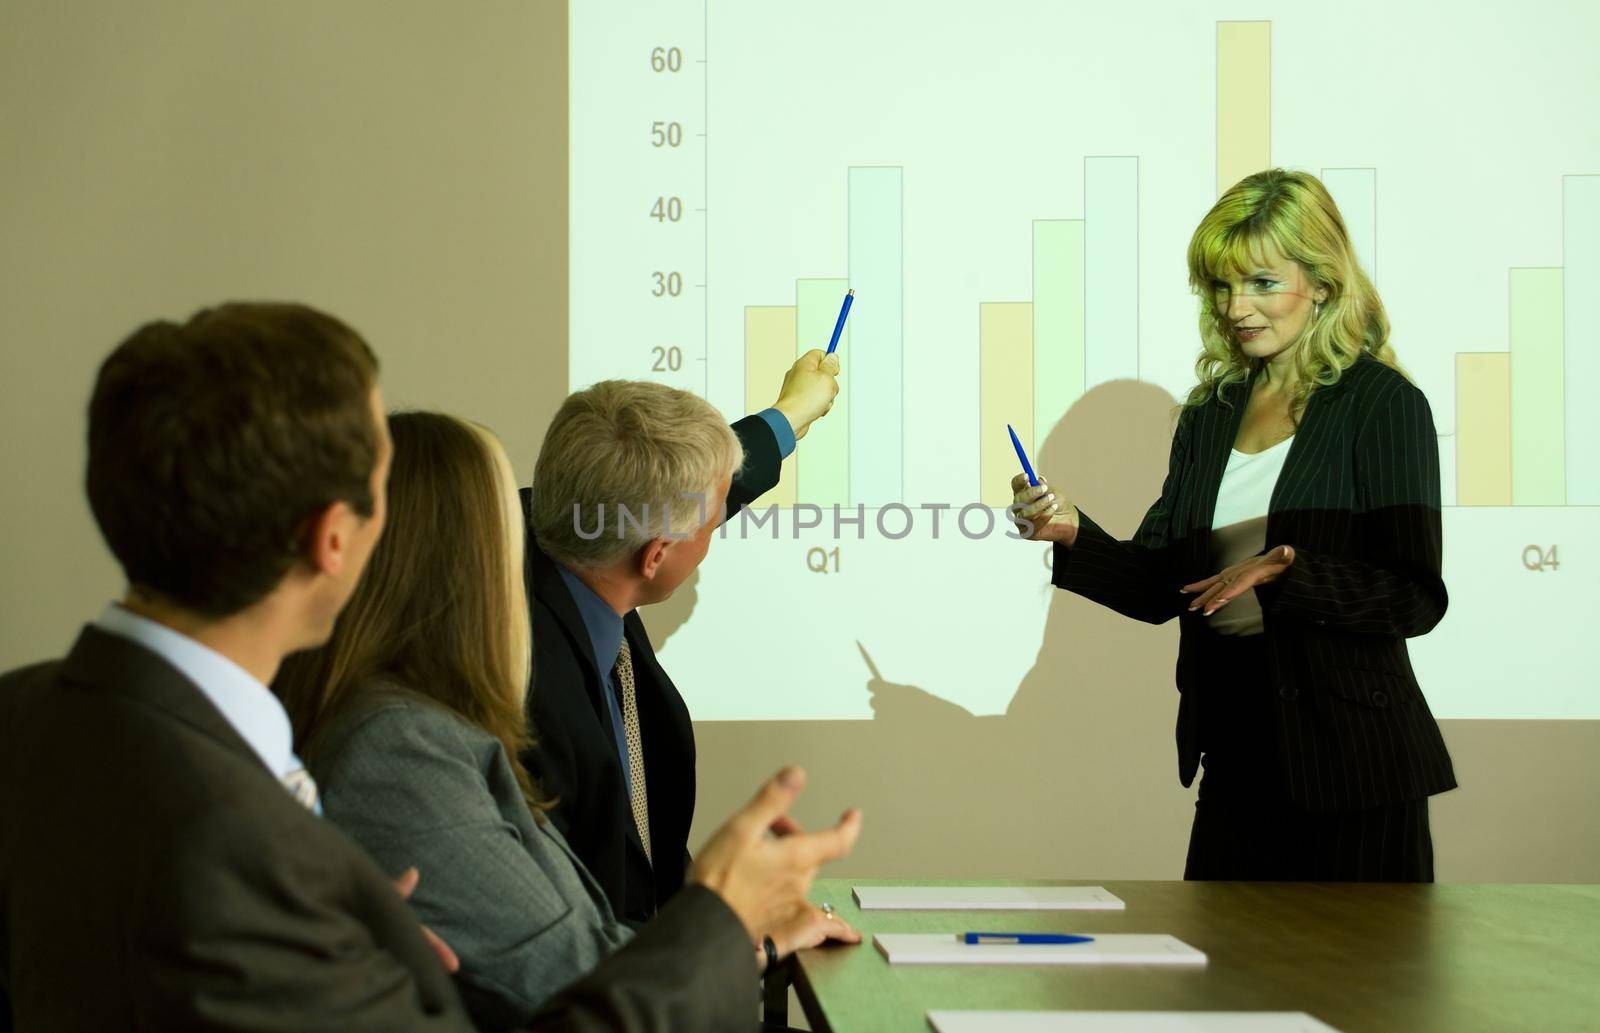 group of people listening to a video presentation held by a blond woman, one attendant asking something